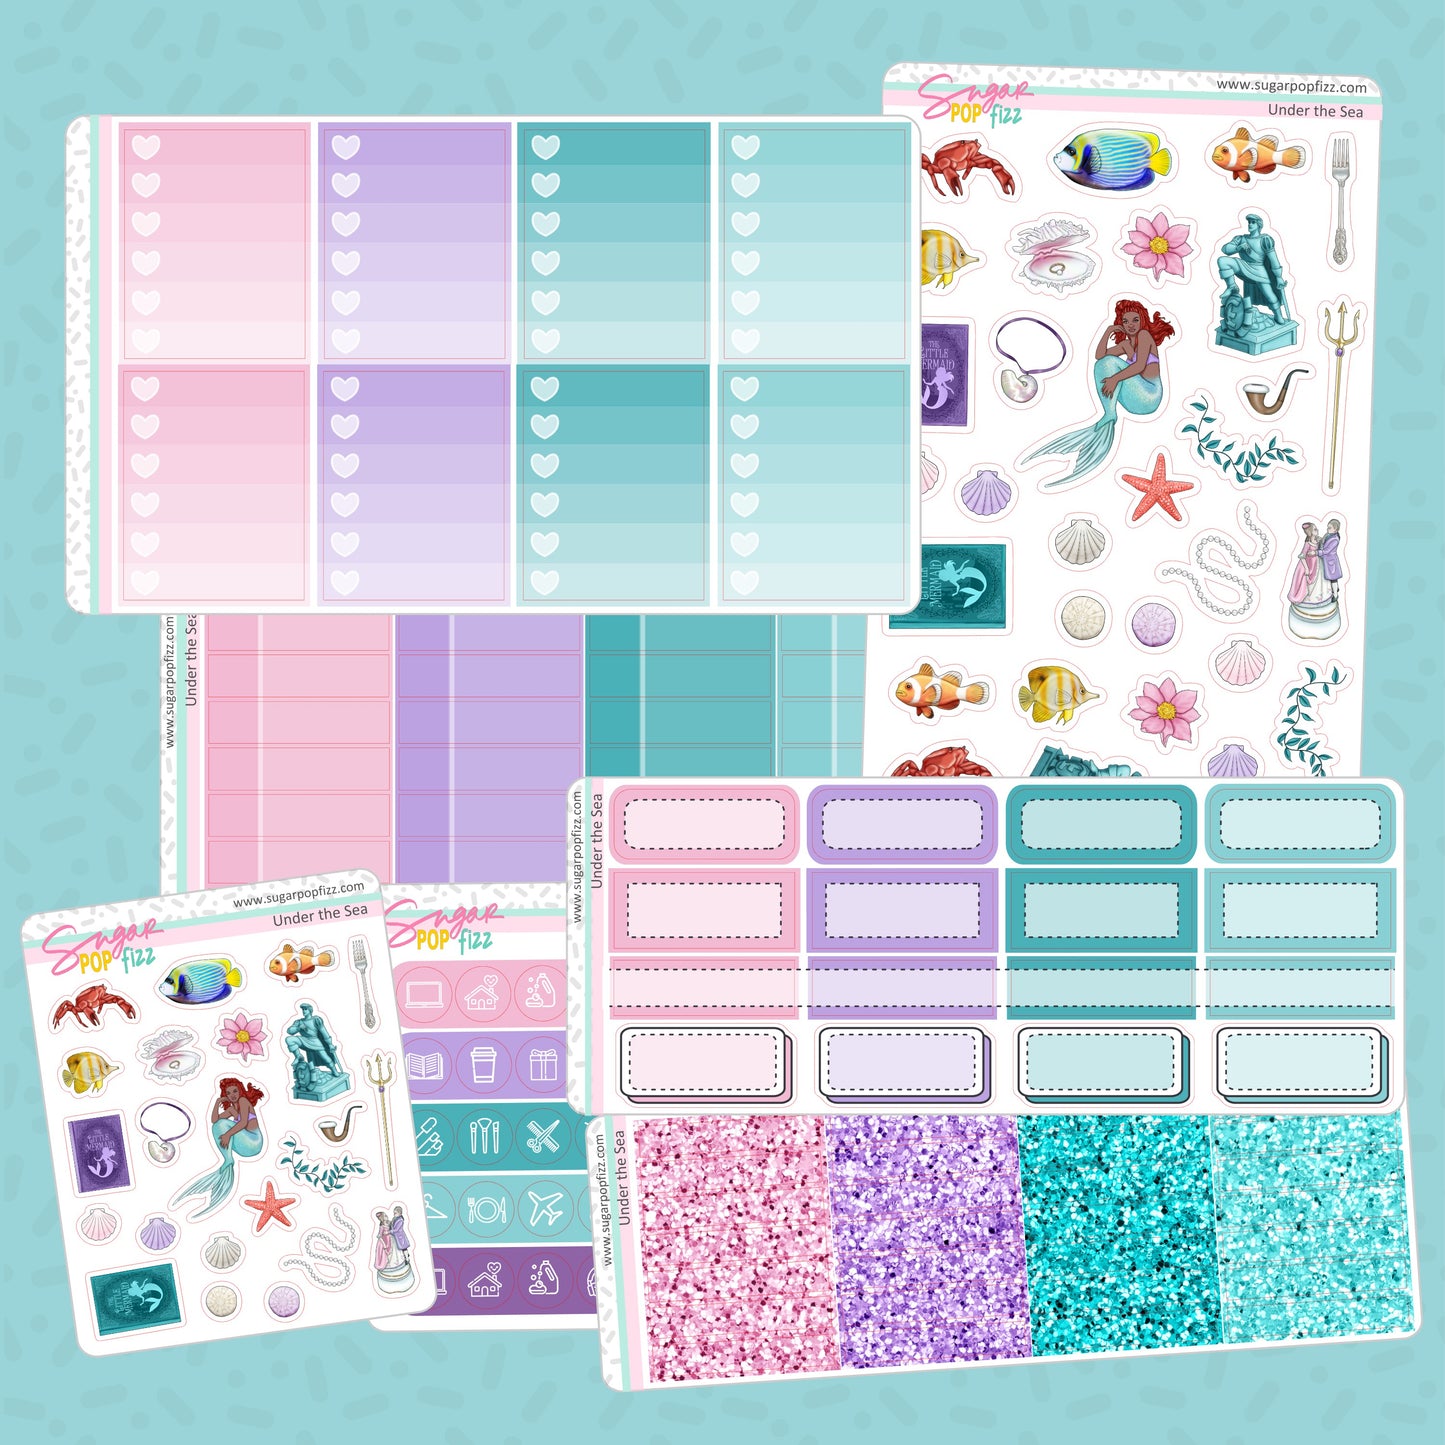 Under the Sea Weekly Kit Add-ons